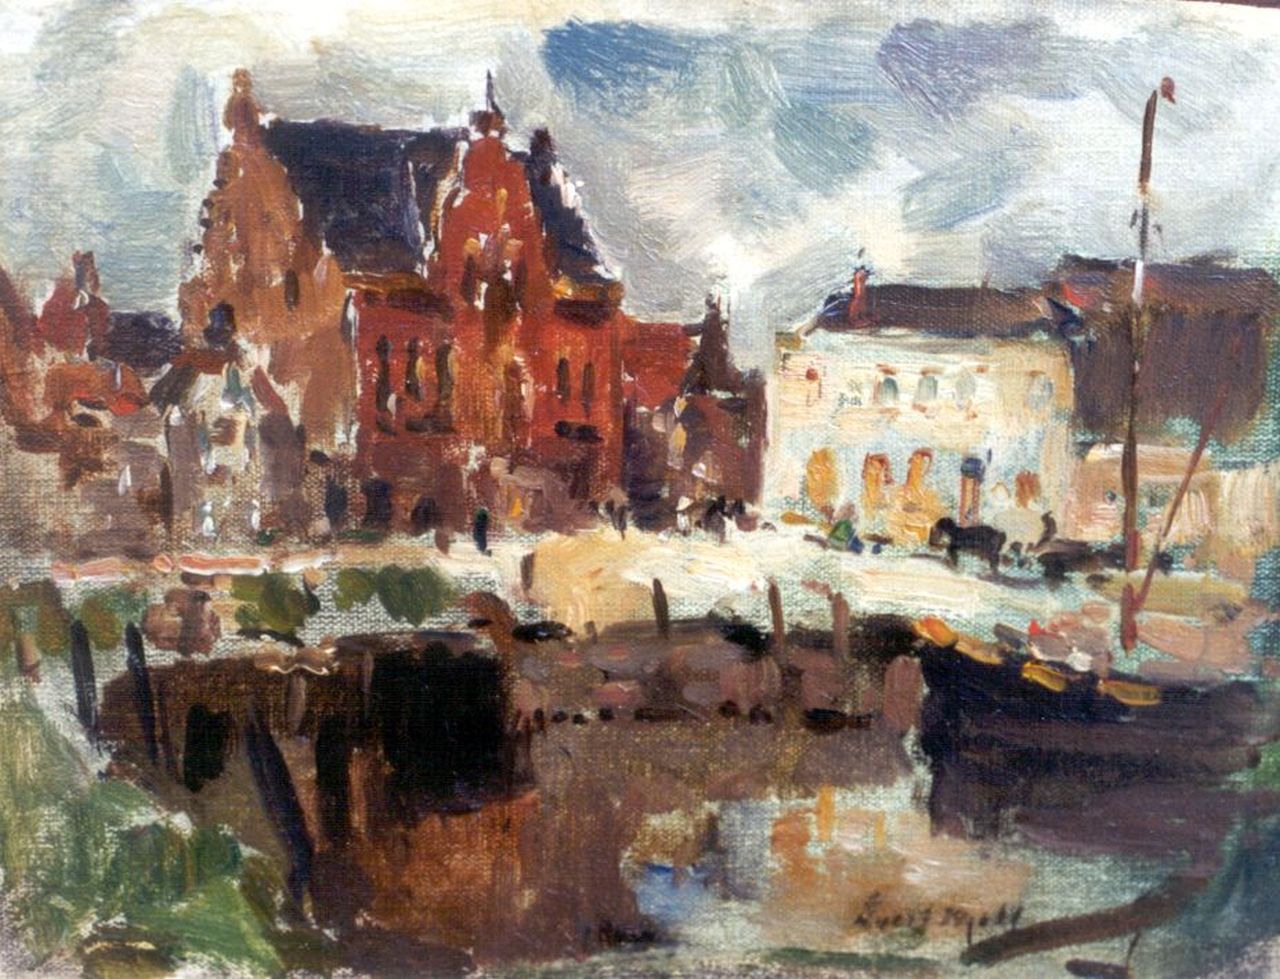 Moll E.  | Evert Moll, The city hall, Ooltgensplaat, oil on canvas laid down on painter's board 15.7 x 20.8 cm, signed l.r.